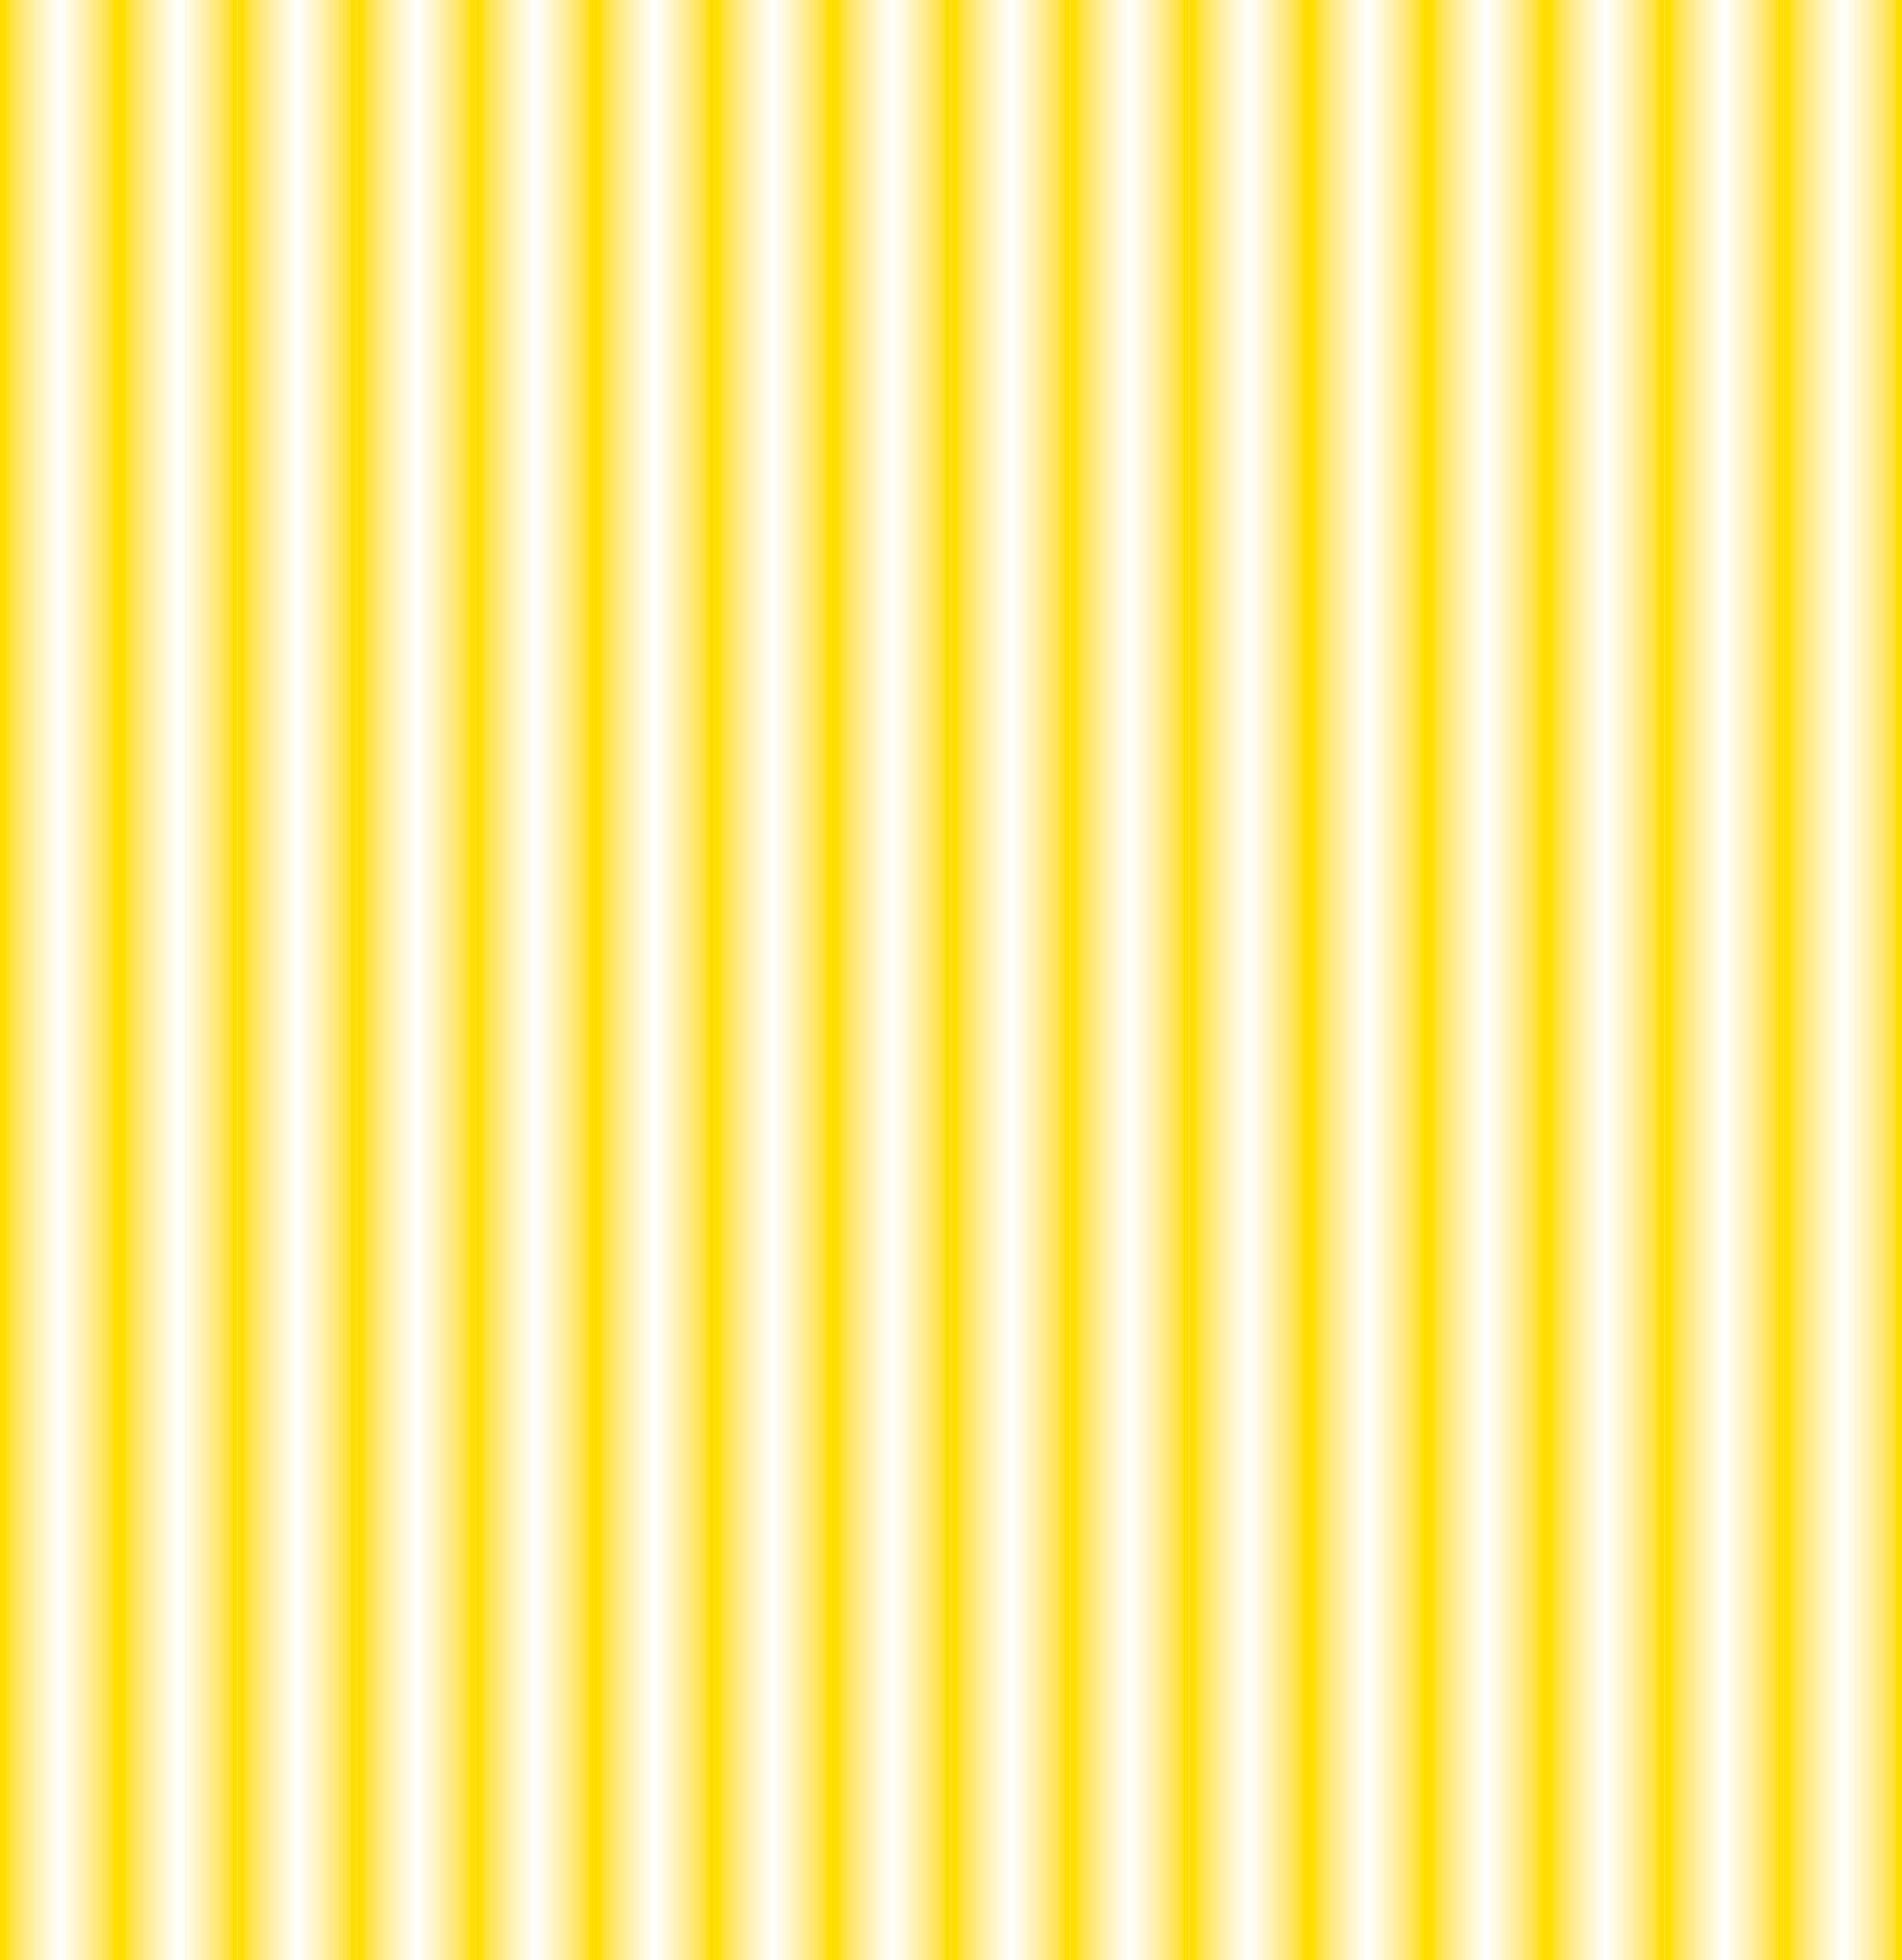 Striped Wallpaper Design In Yellow And White